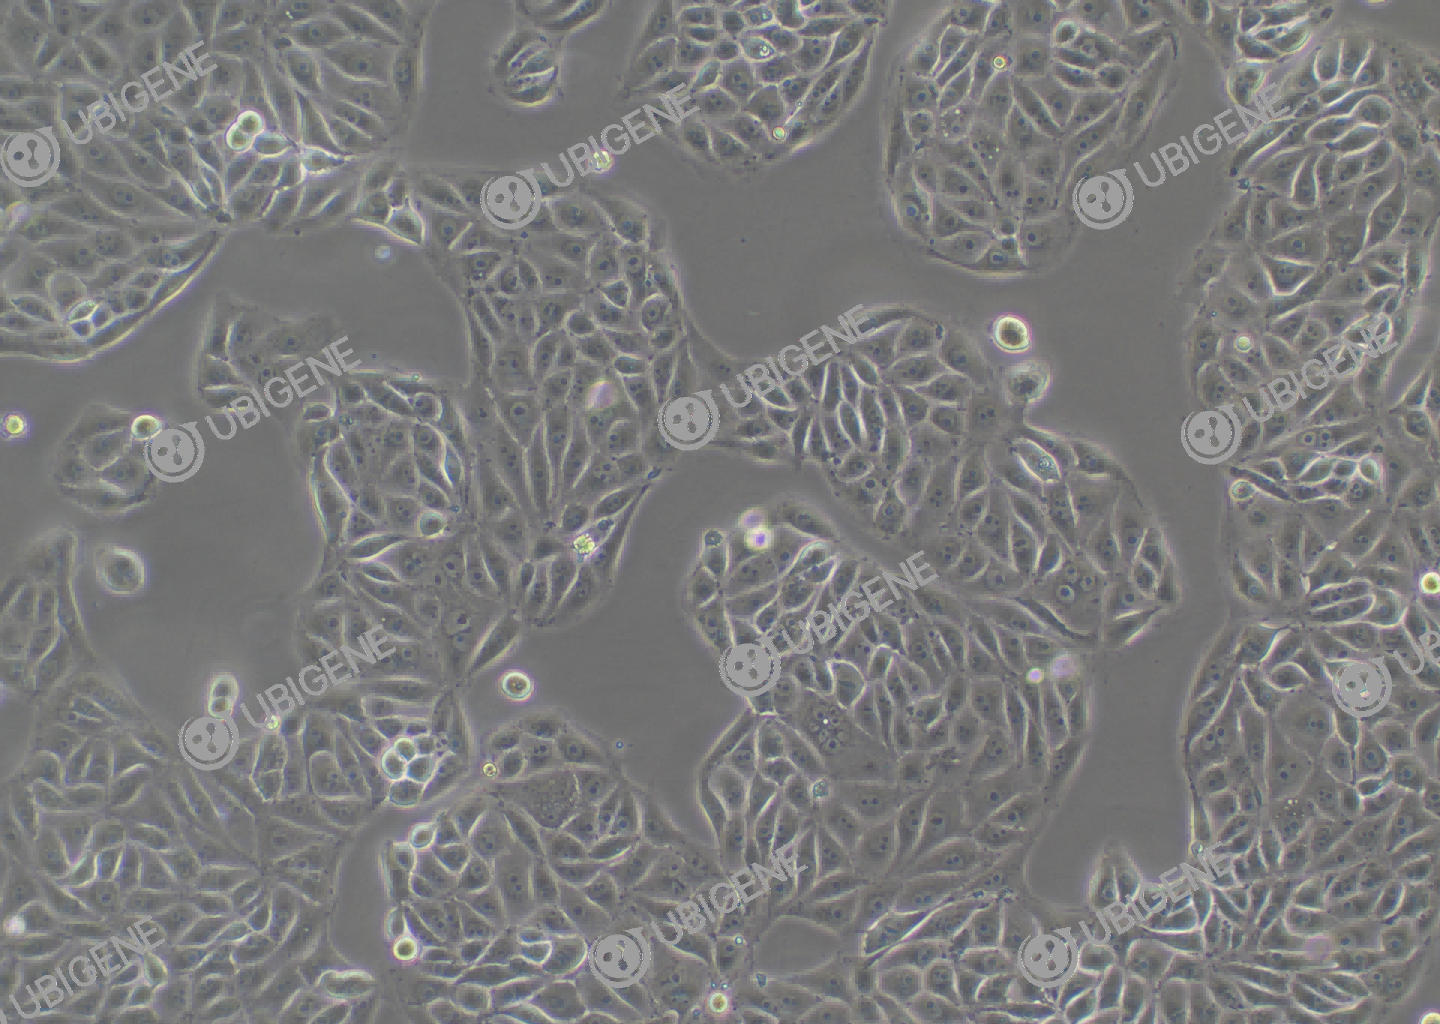 PK-15 cell line Cultured cell morphology